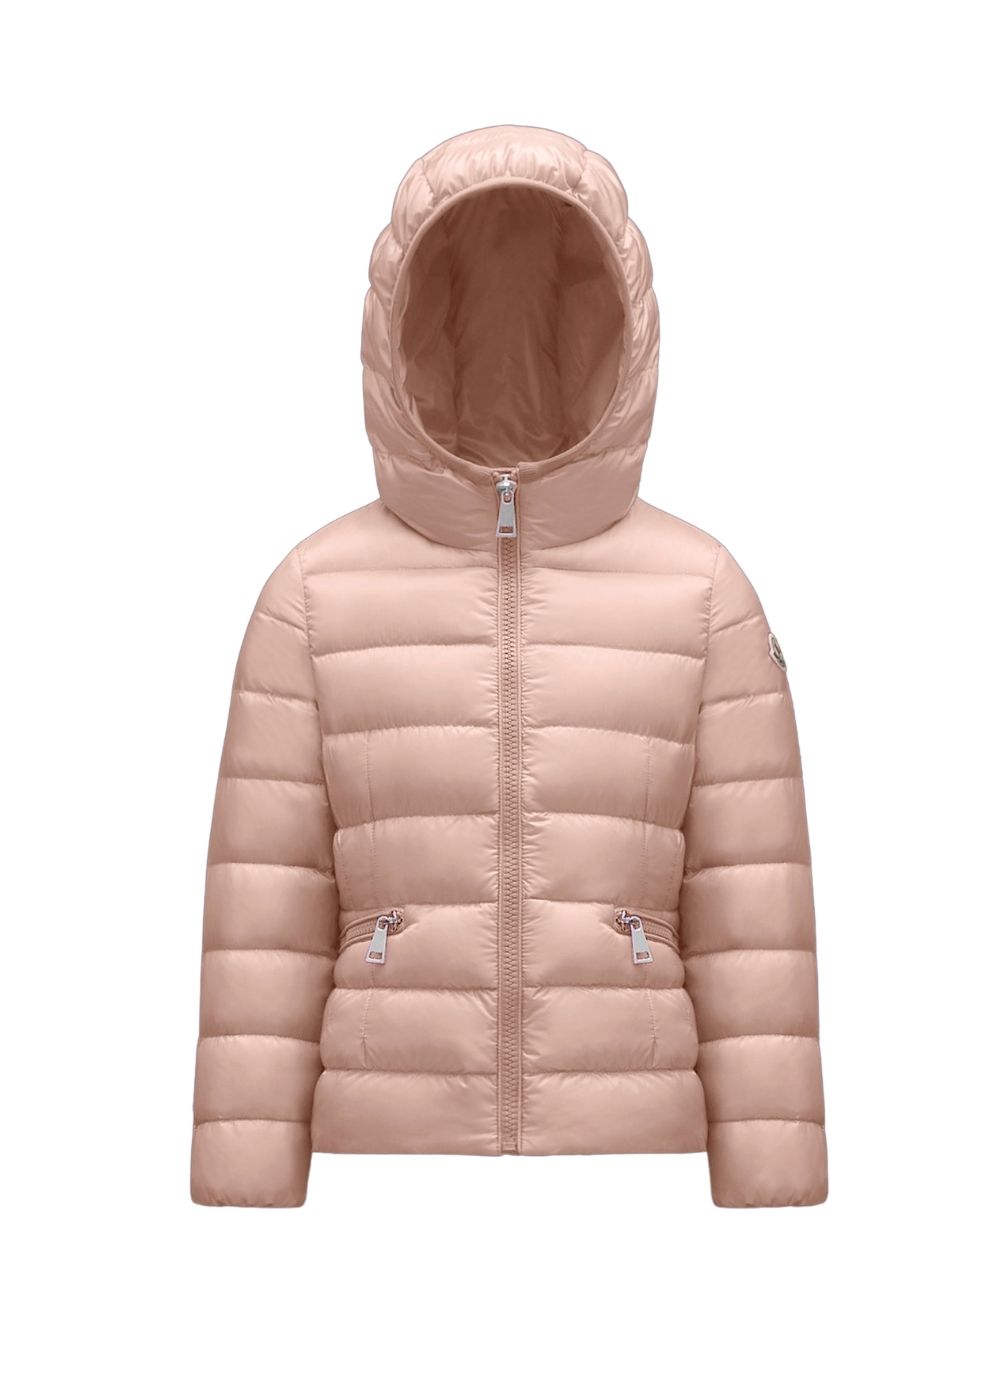 Featured image for “Moncler Liset 100 Grammi”